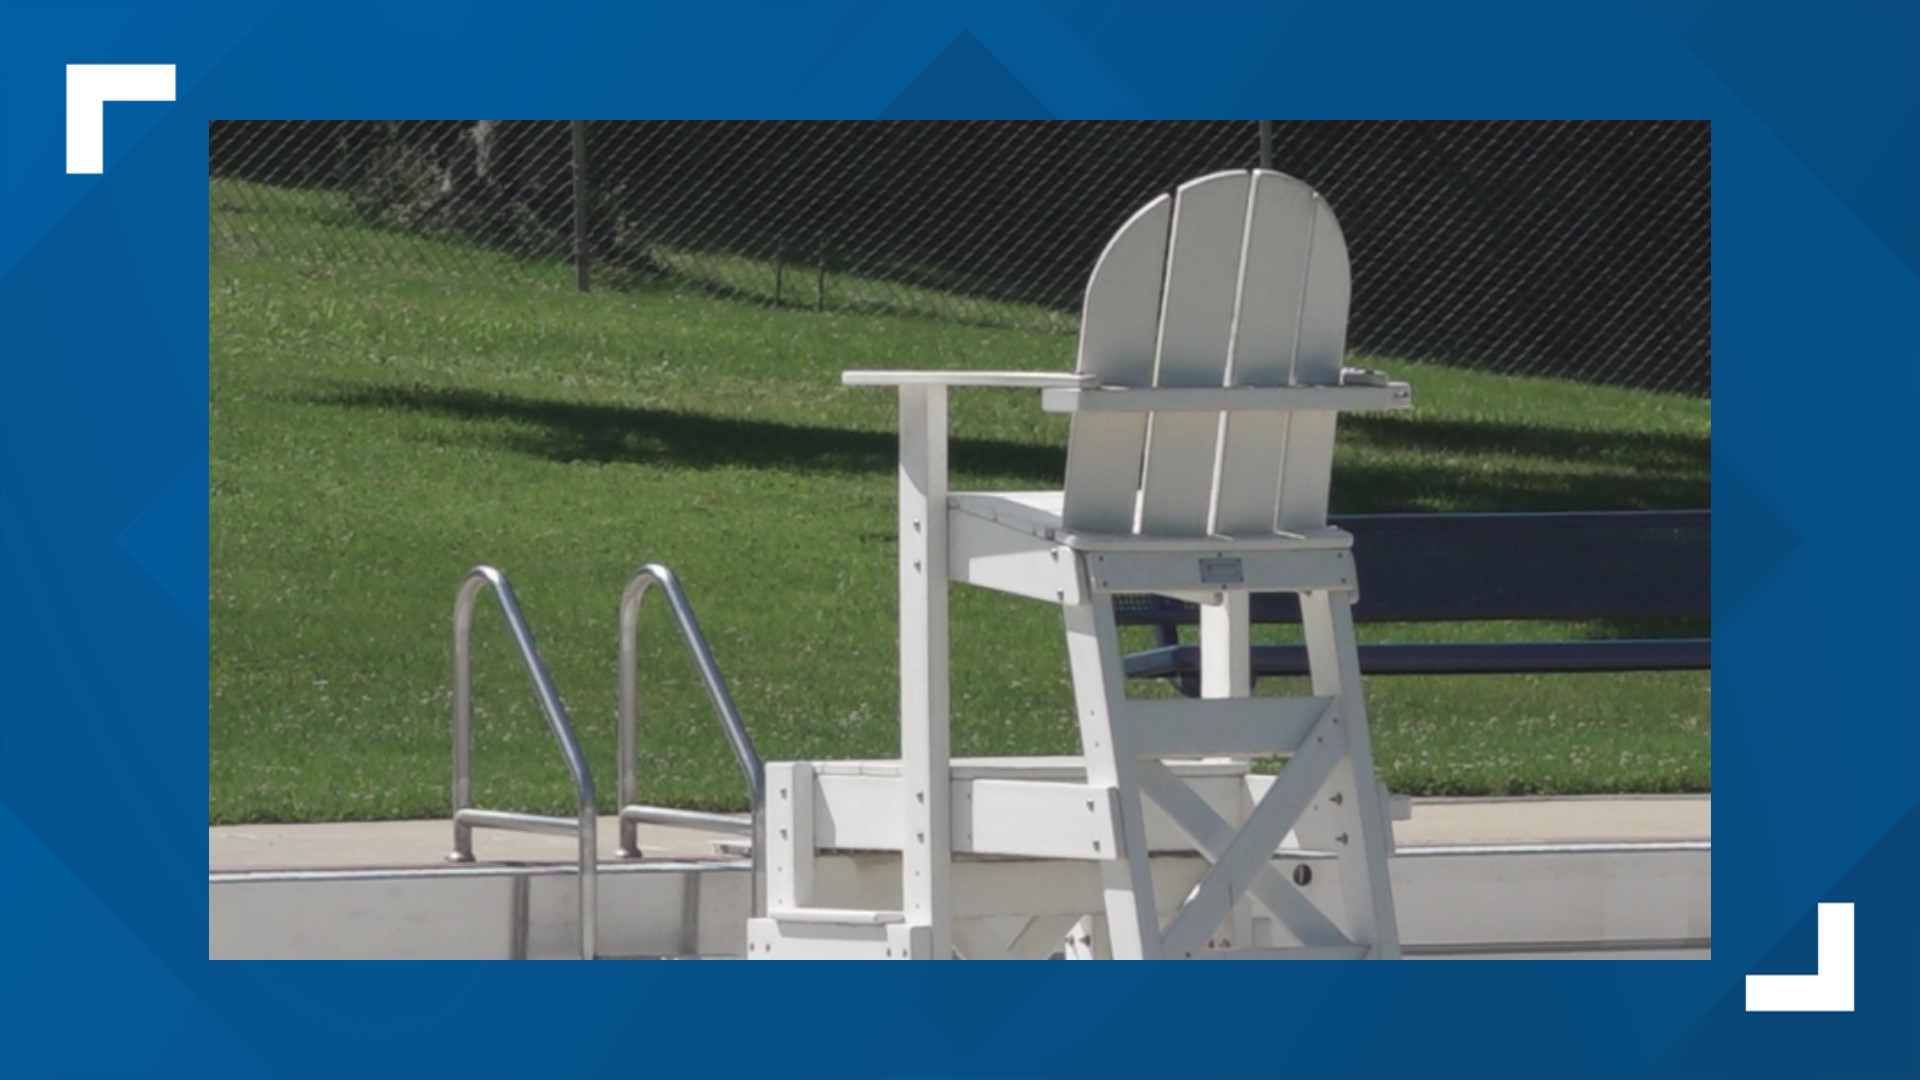 The county had previously announced it would not be opening the pool this summer due to a lifeguard shortage. But there are high hopes that will change.